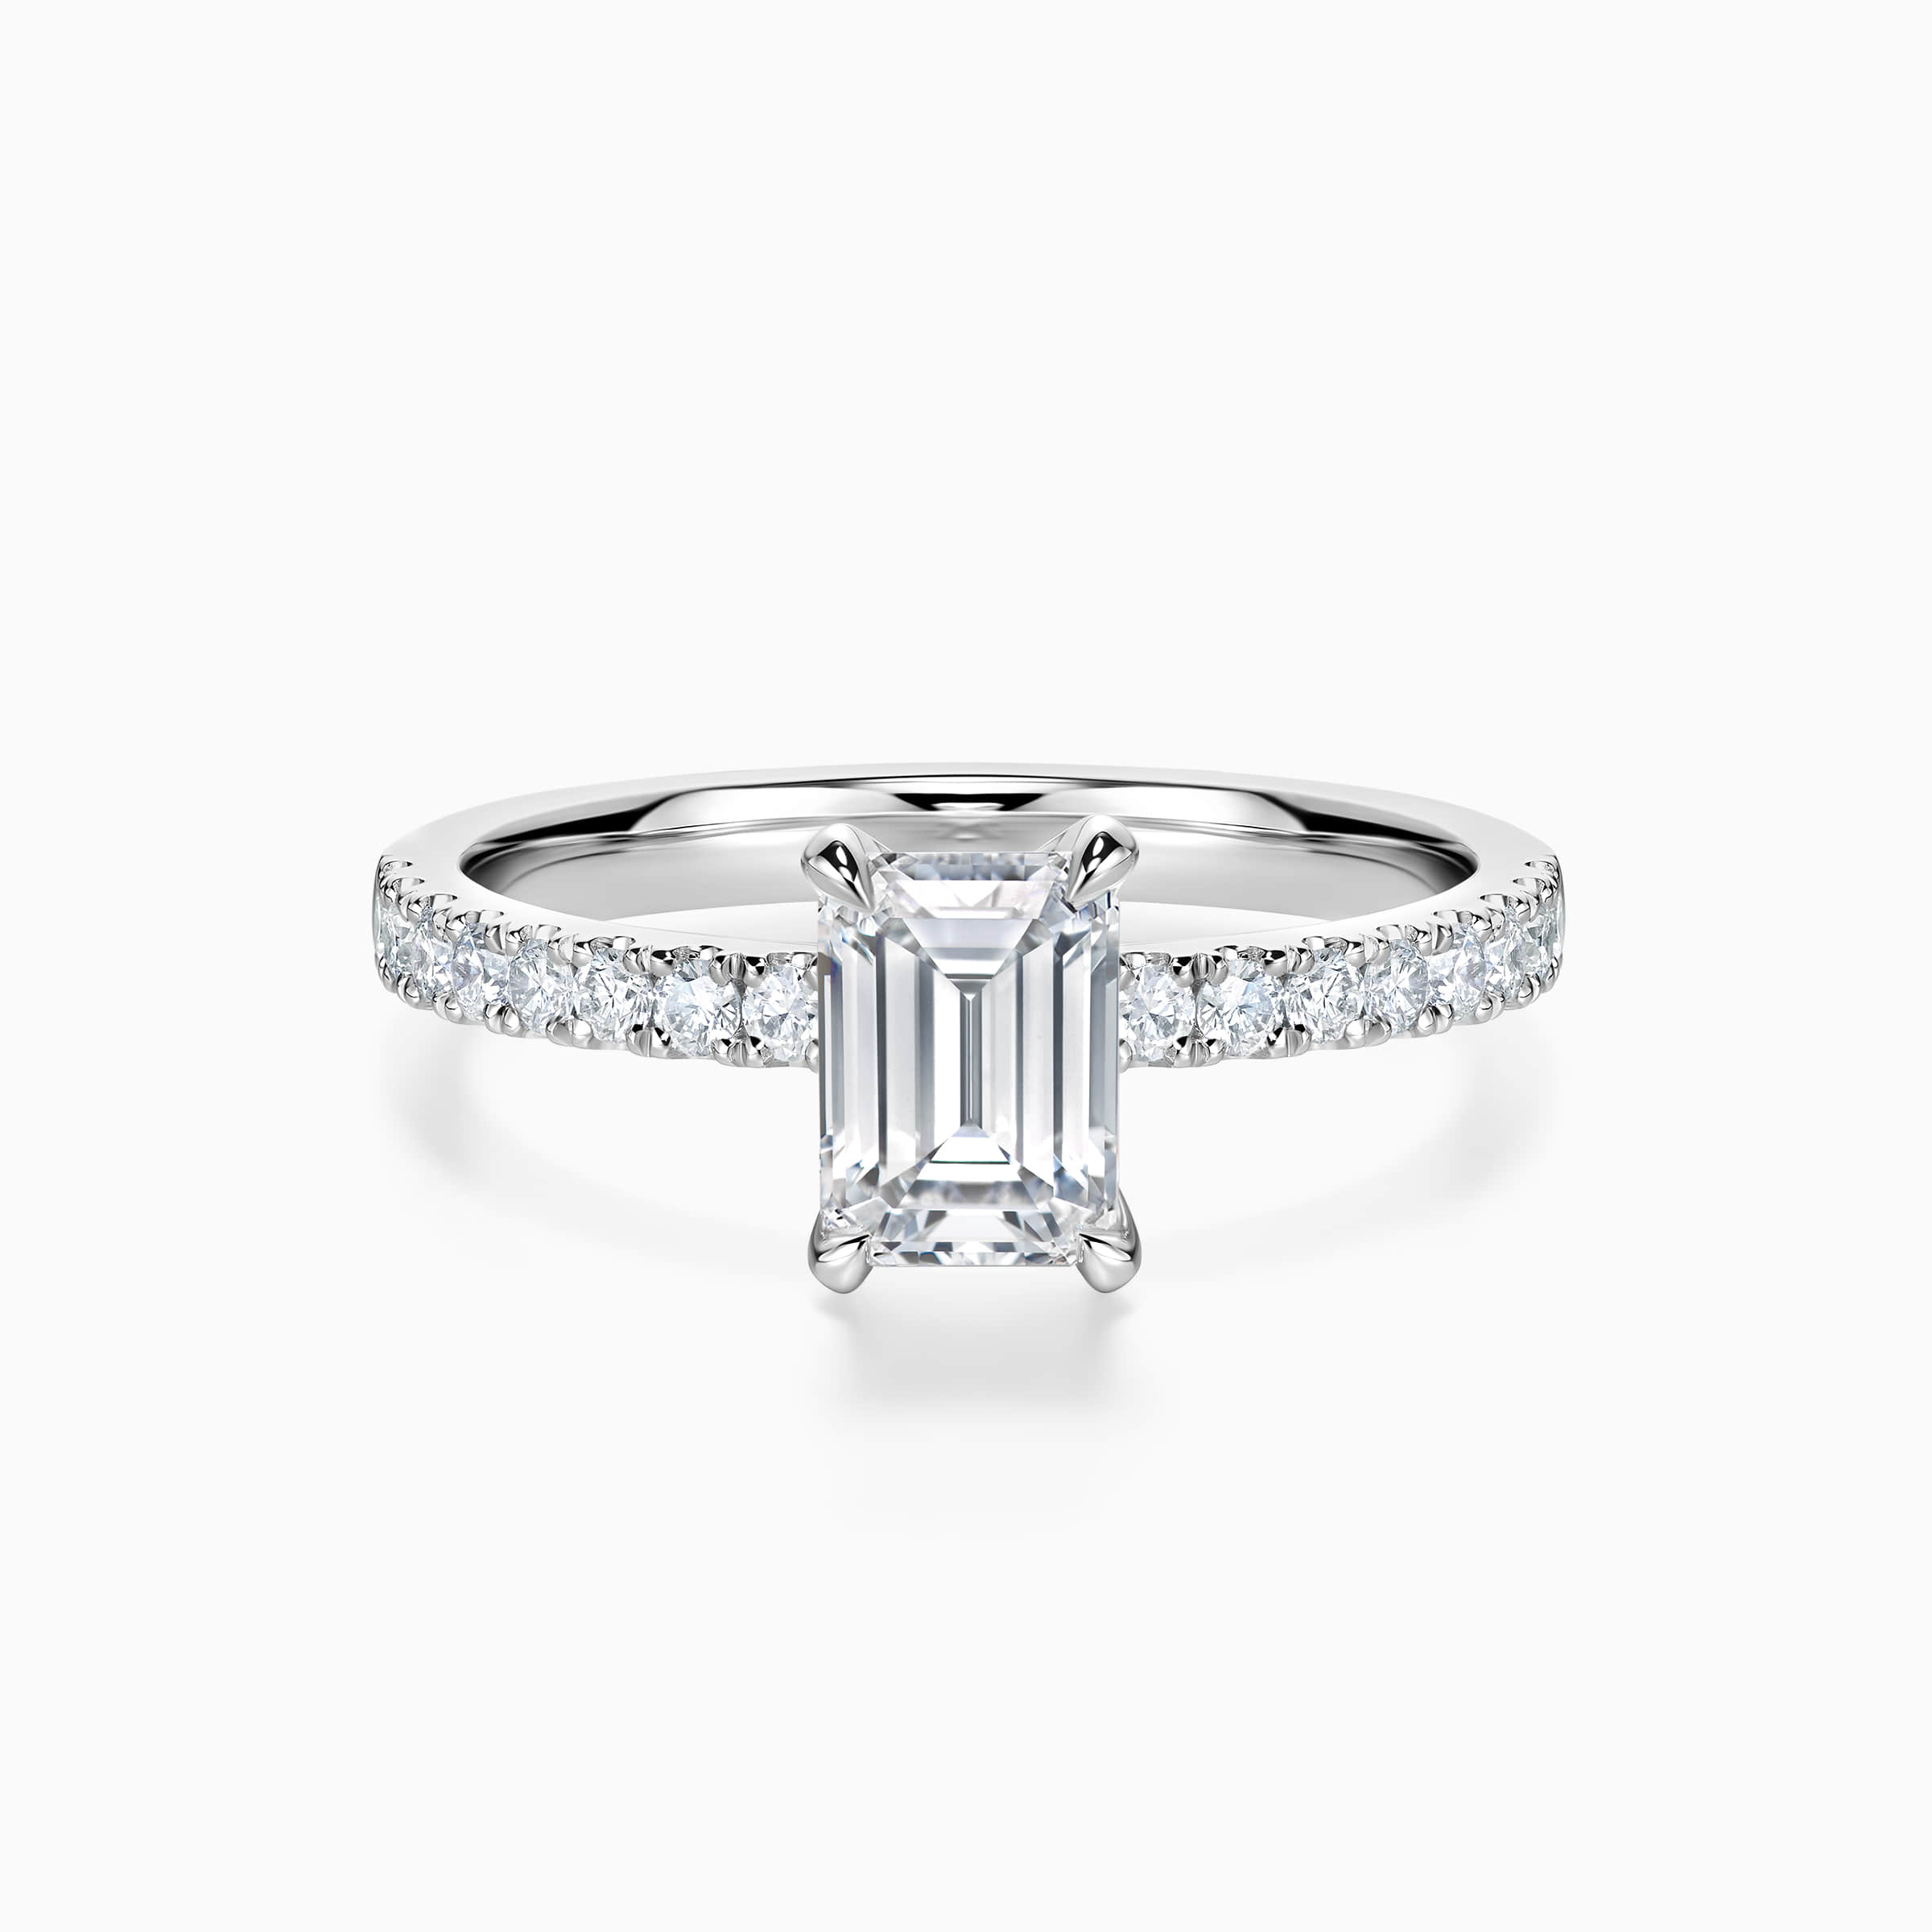 Darry Ring emerald cut promise ring